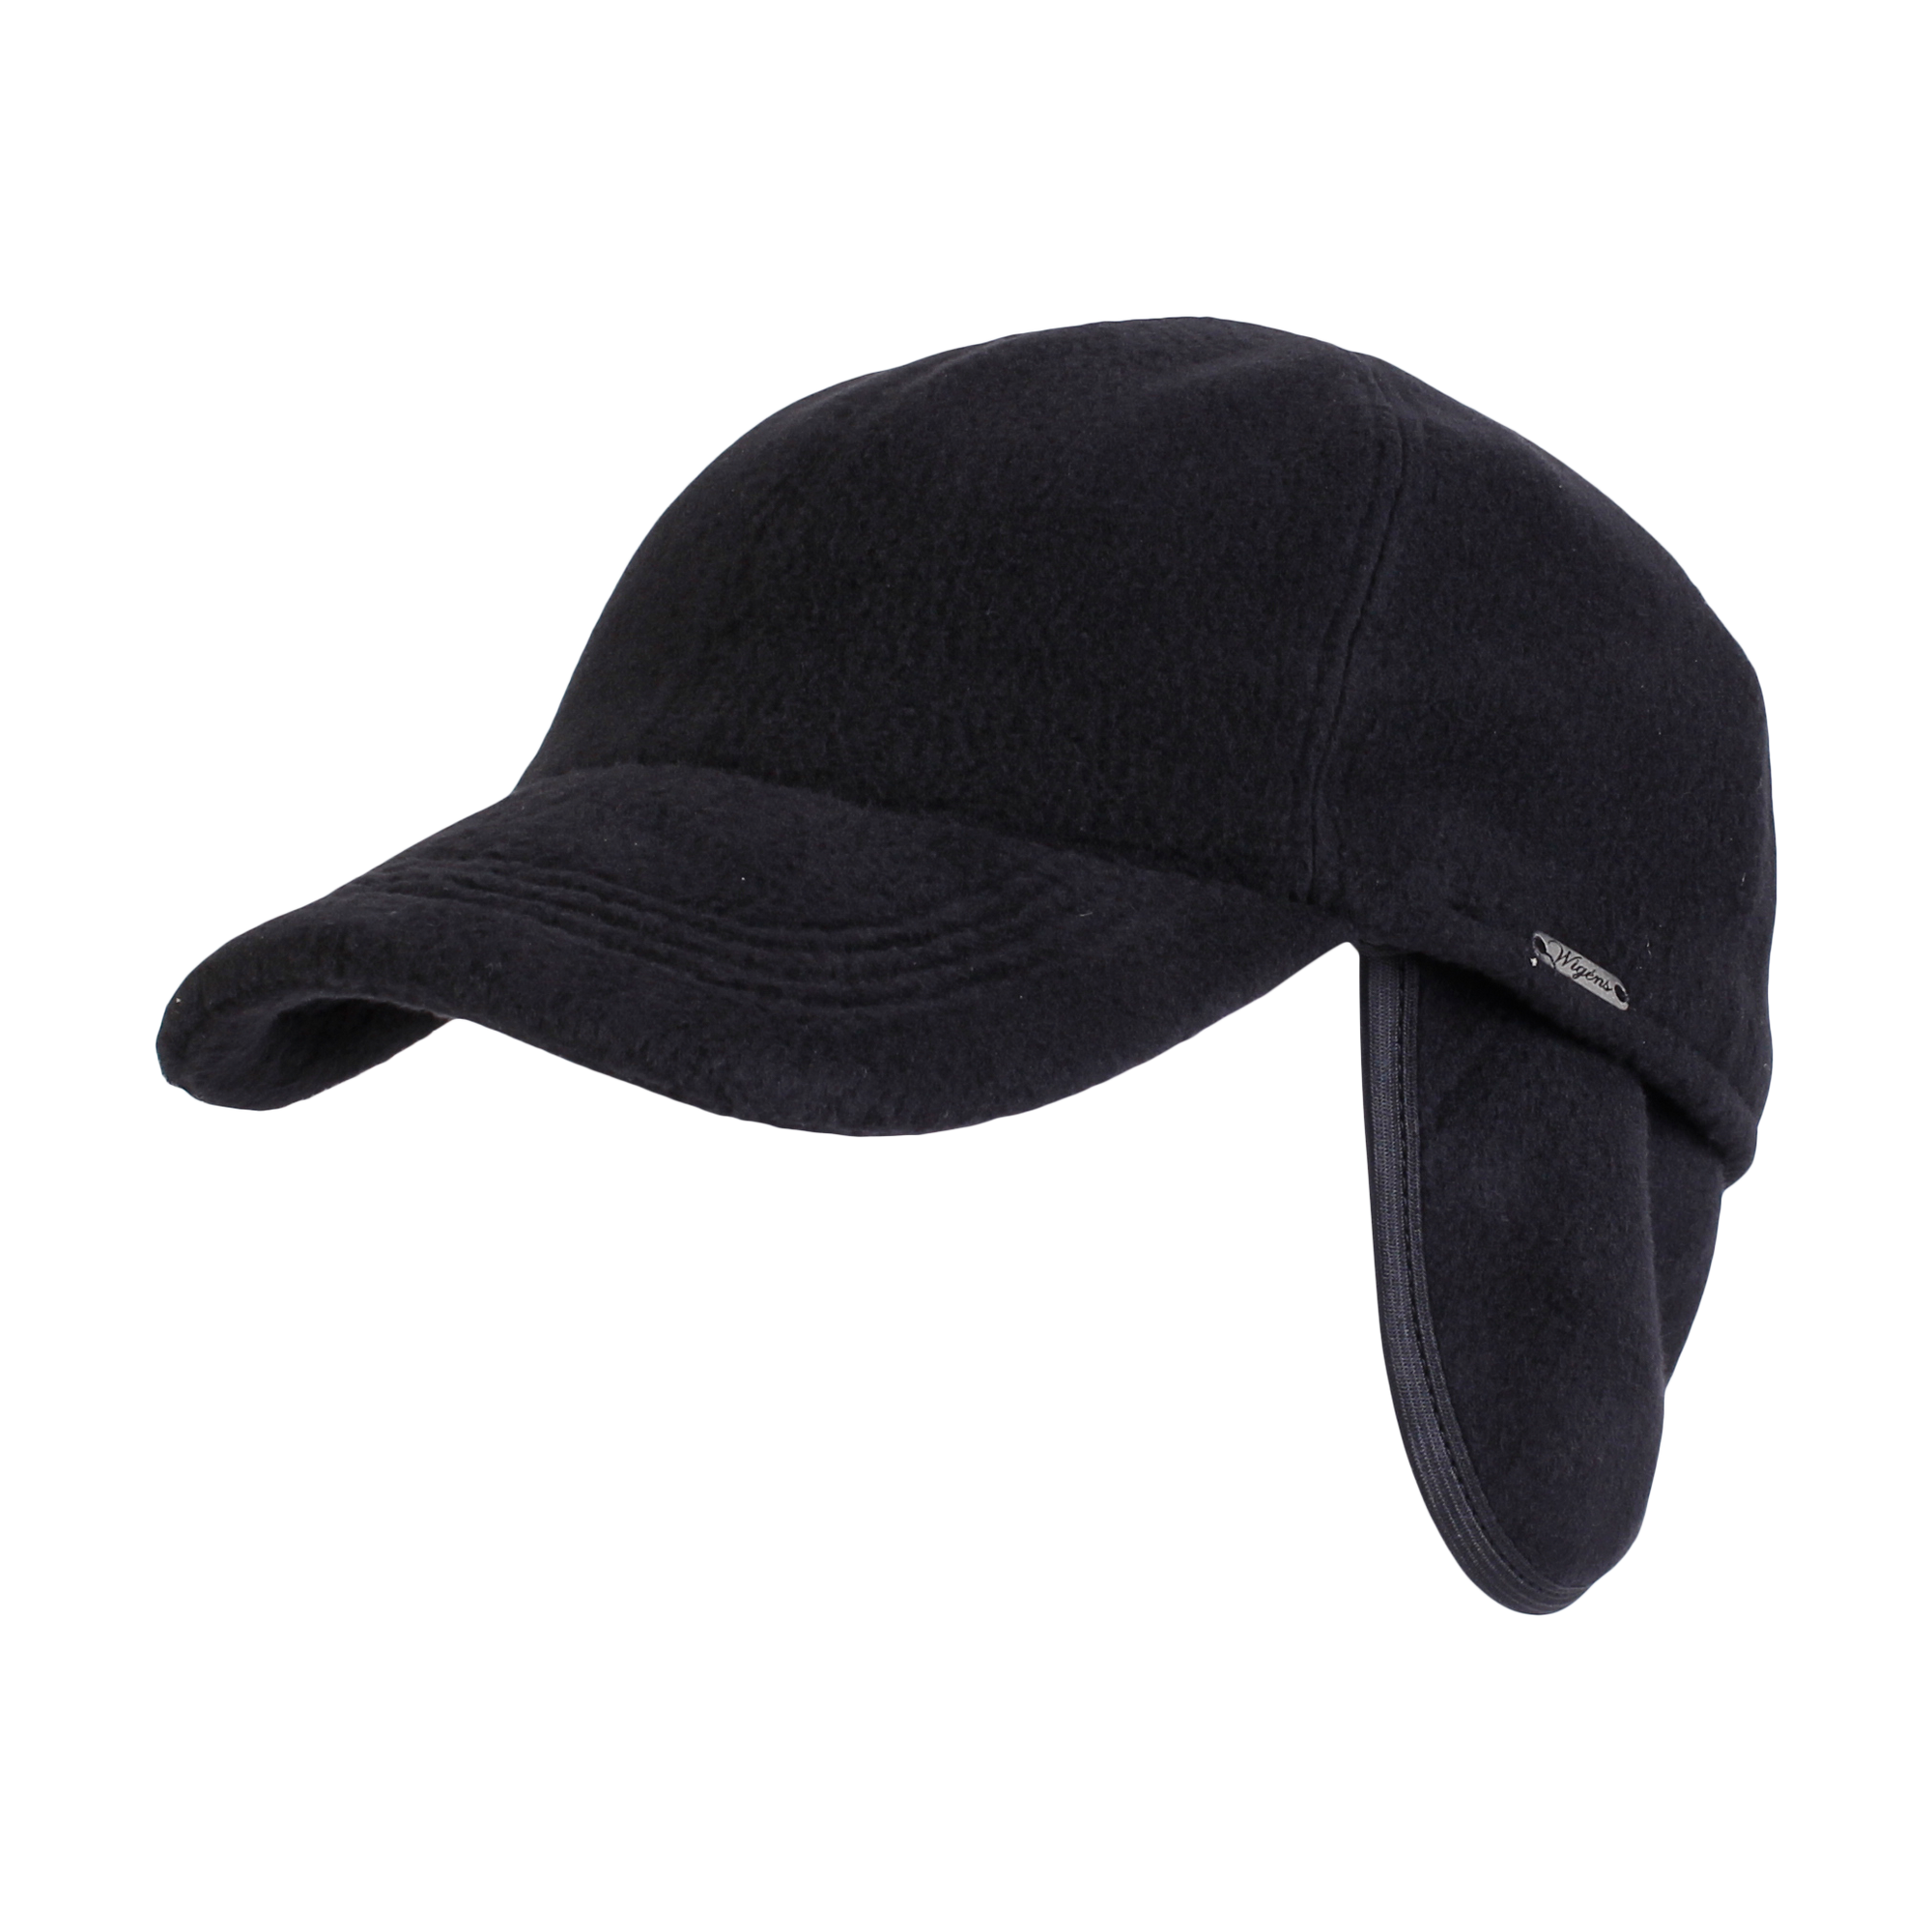 Fleece Baseball Classic Cap with Earflaps (Choice of Colors) by Wigens